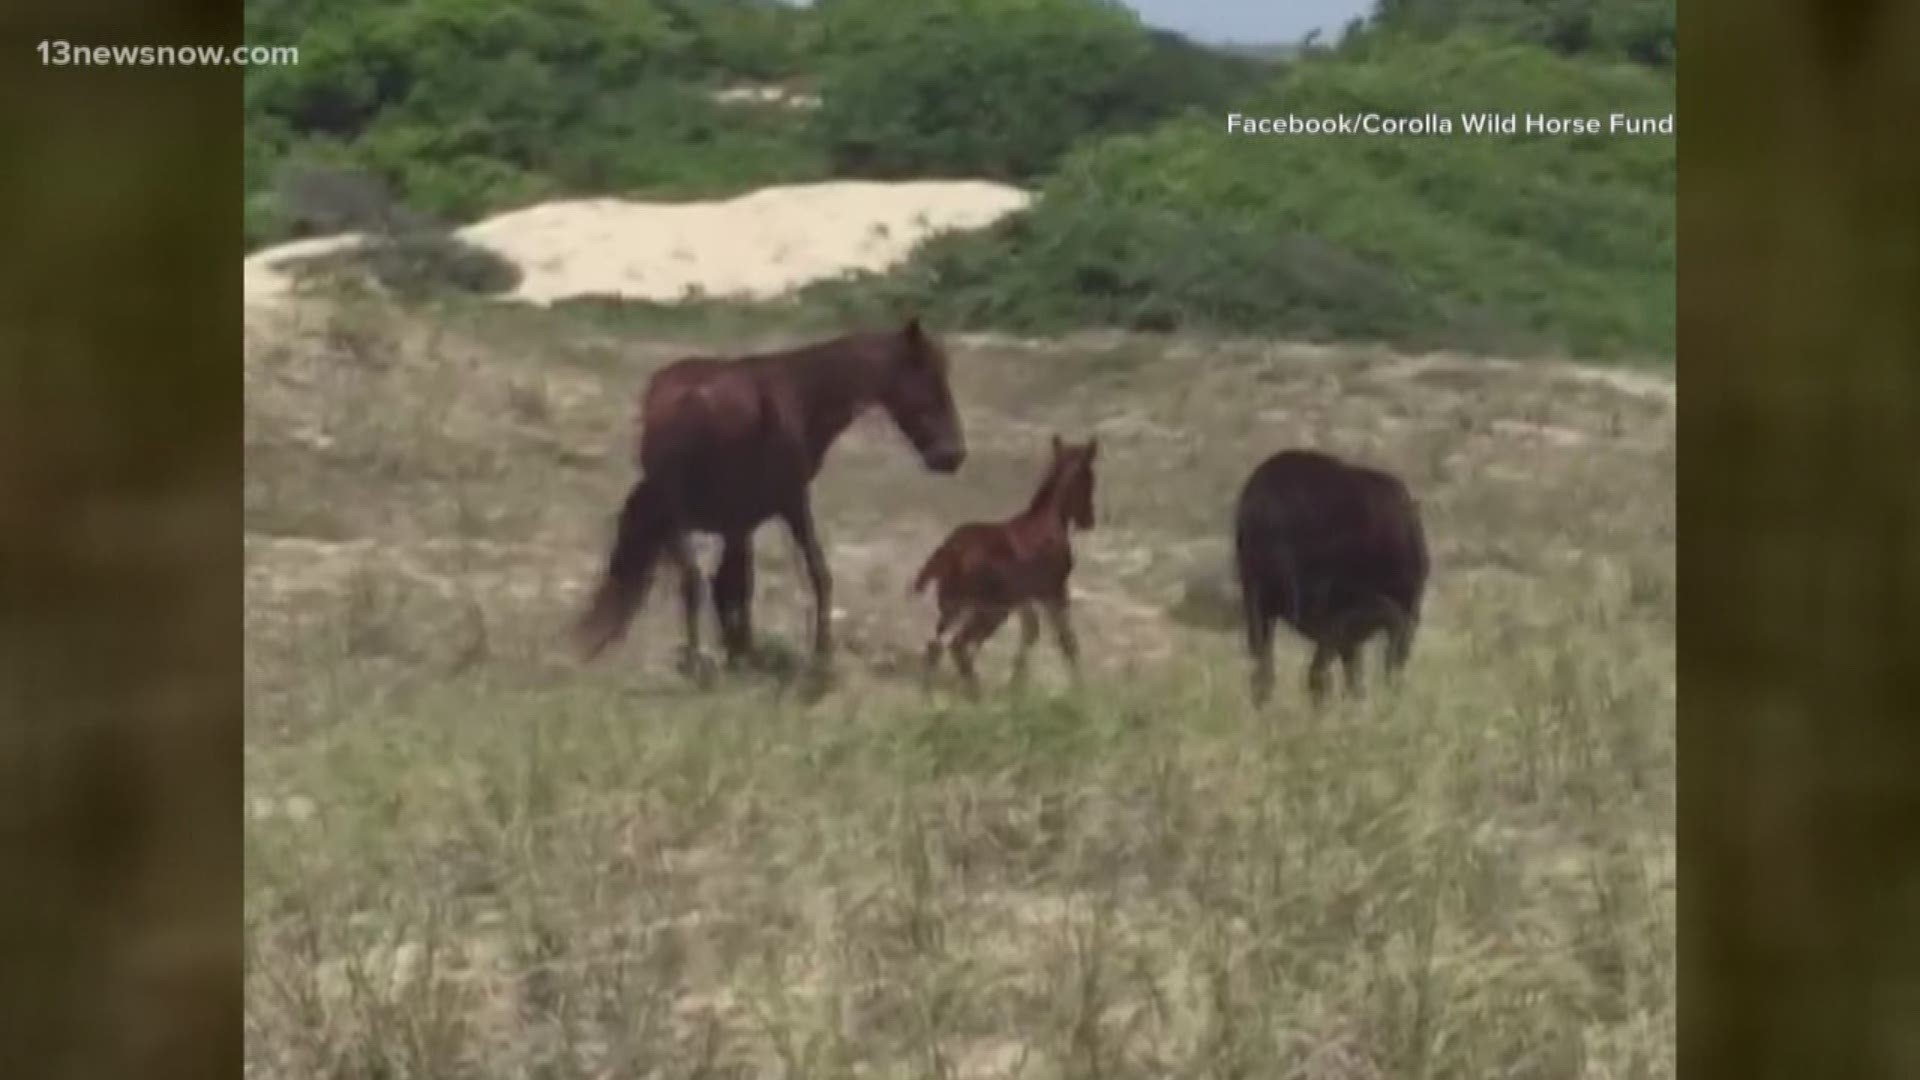 A fifth addition was added to the wild horse herd in Corolla, North Carolina after being born last Monday.